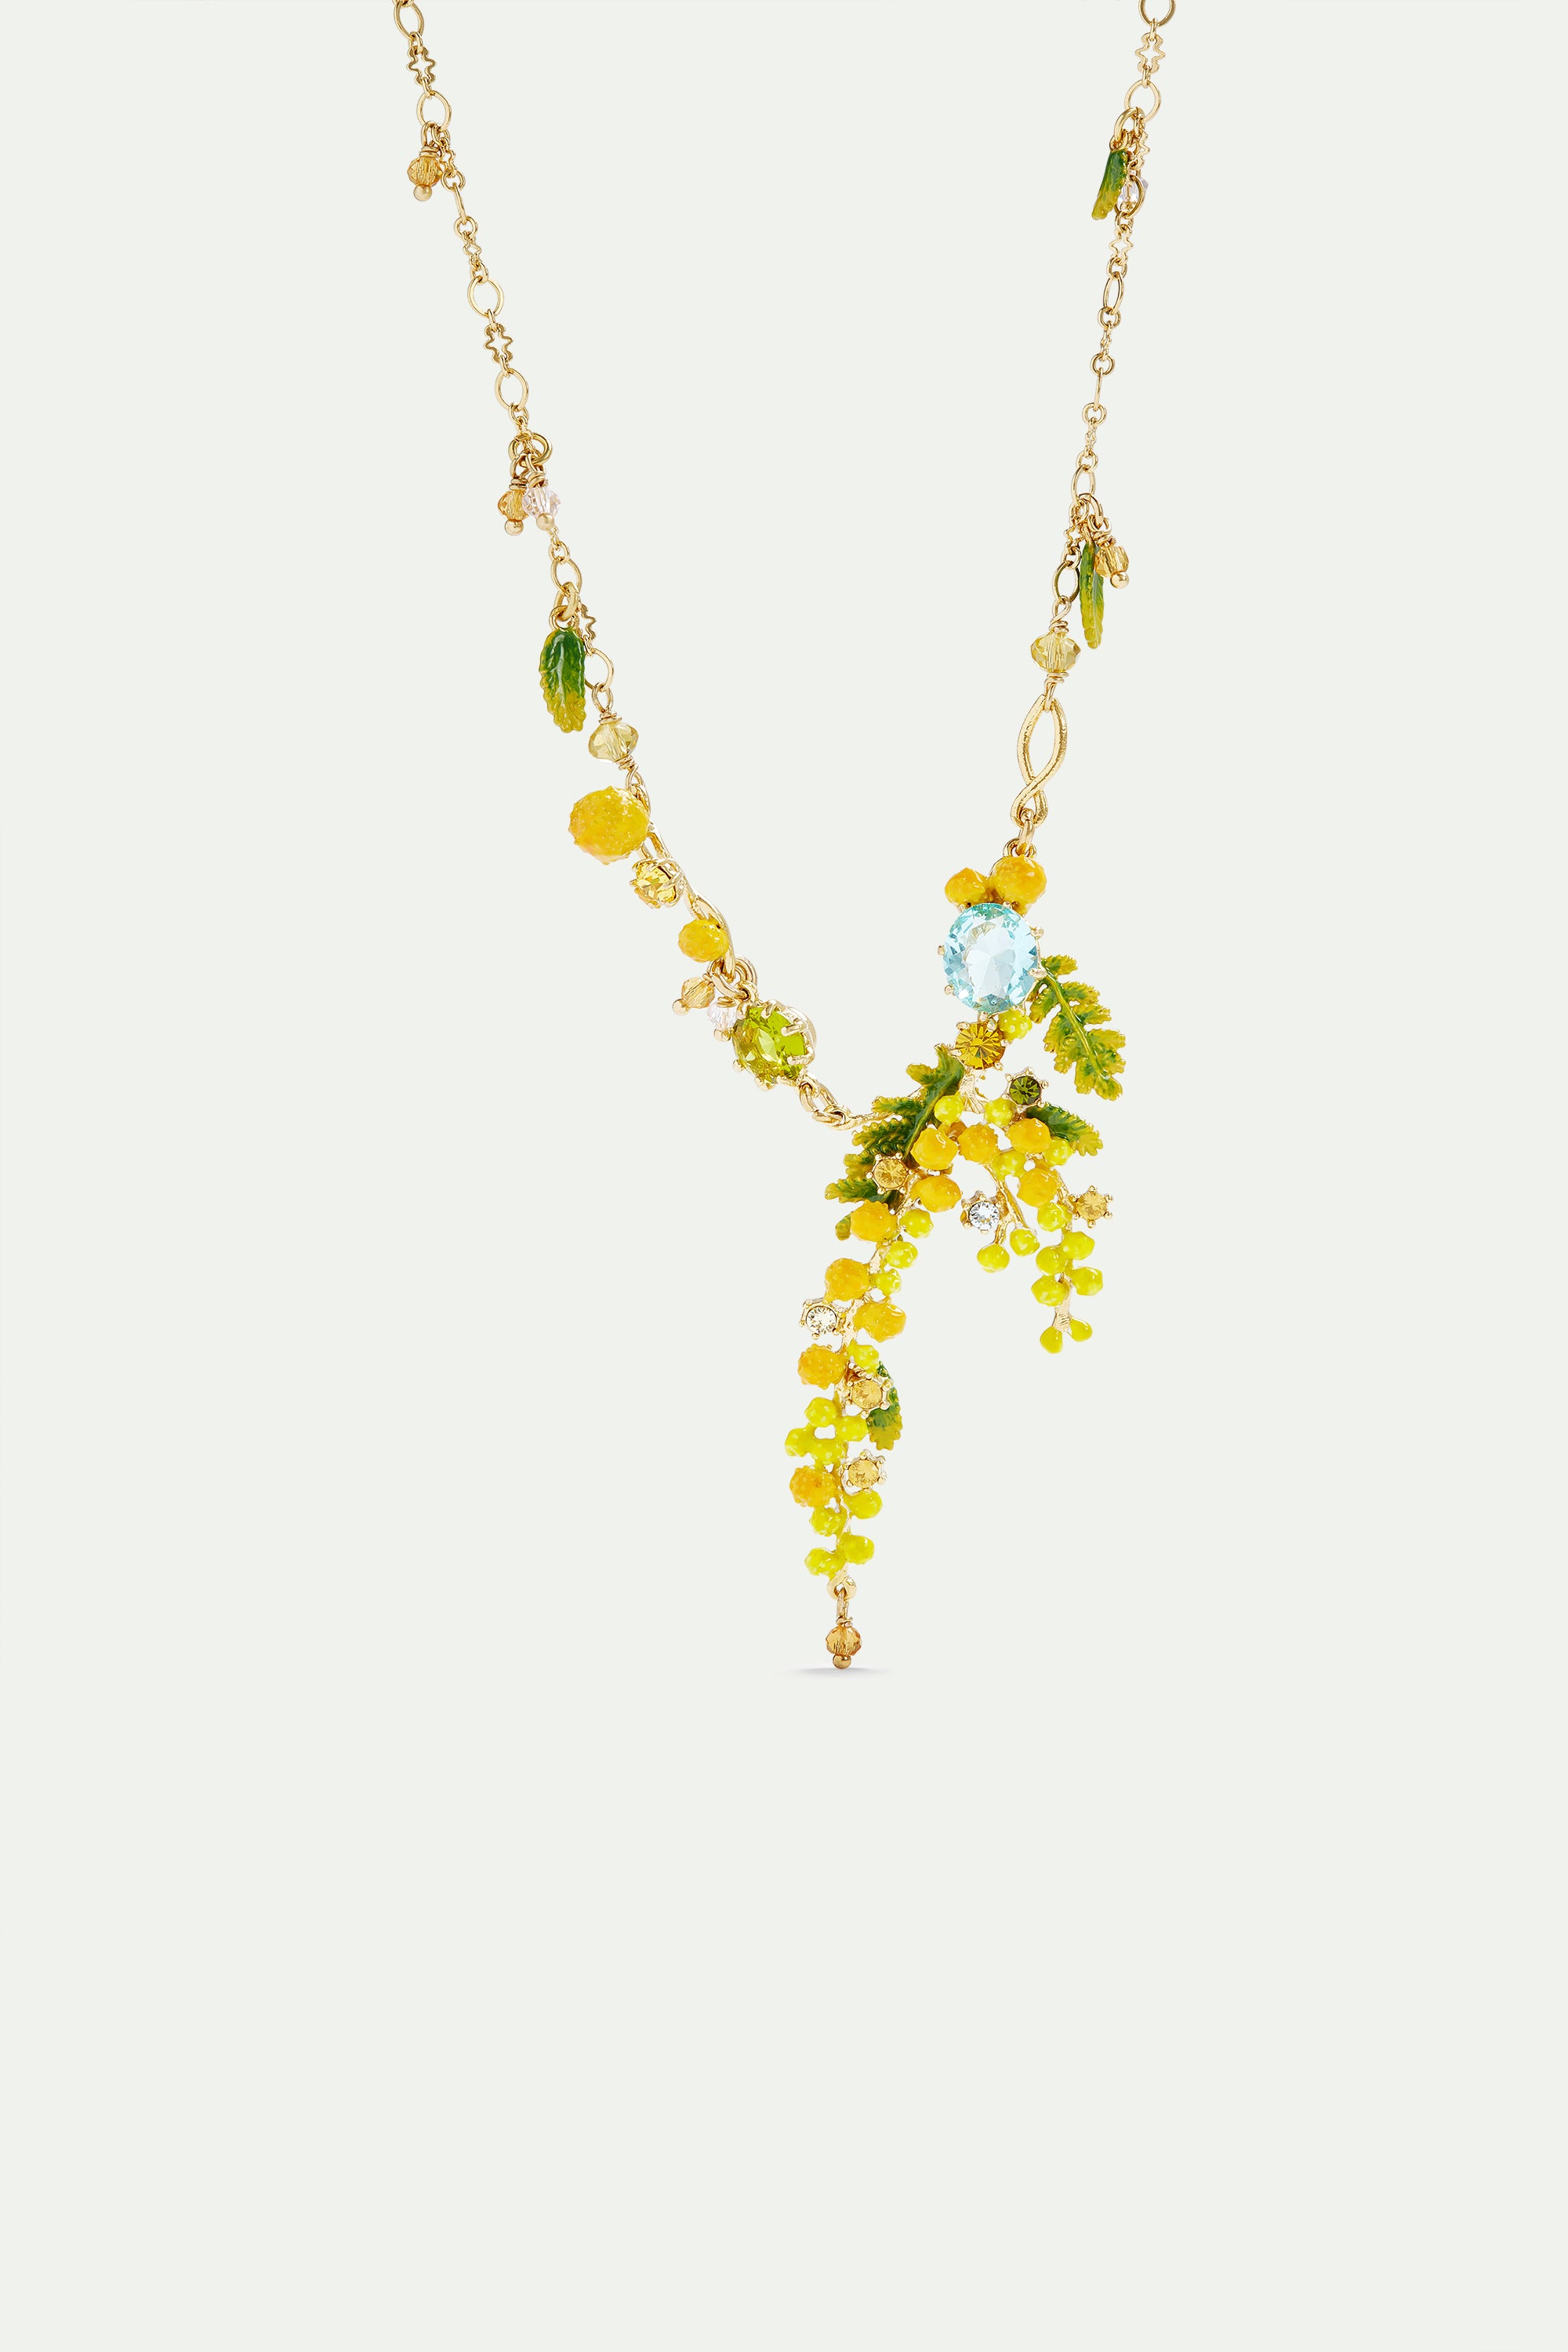 Mimosa's branch, fern and little leaves collar necklace